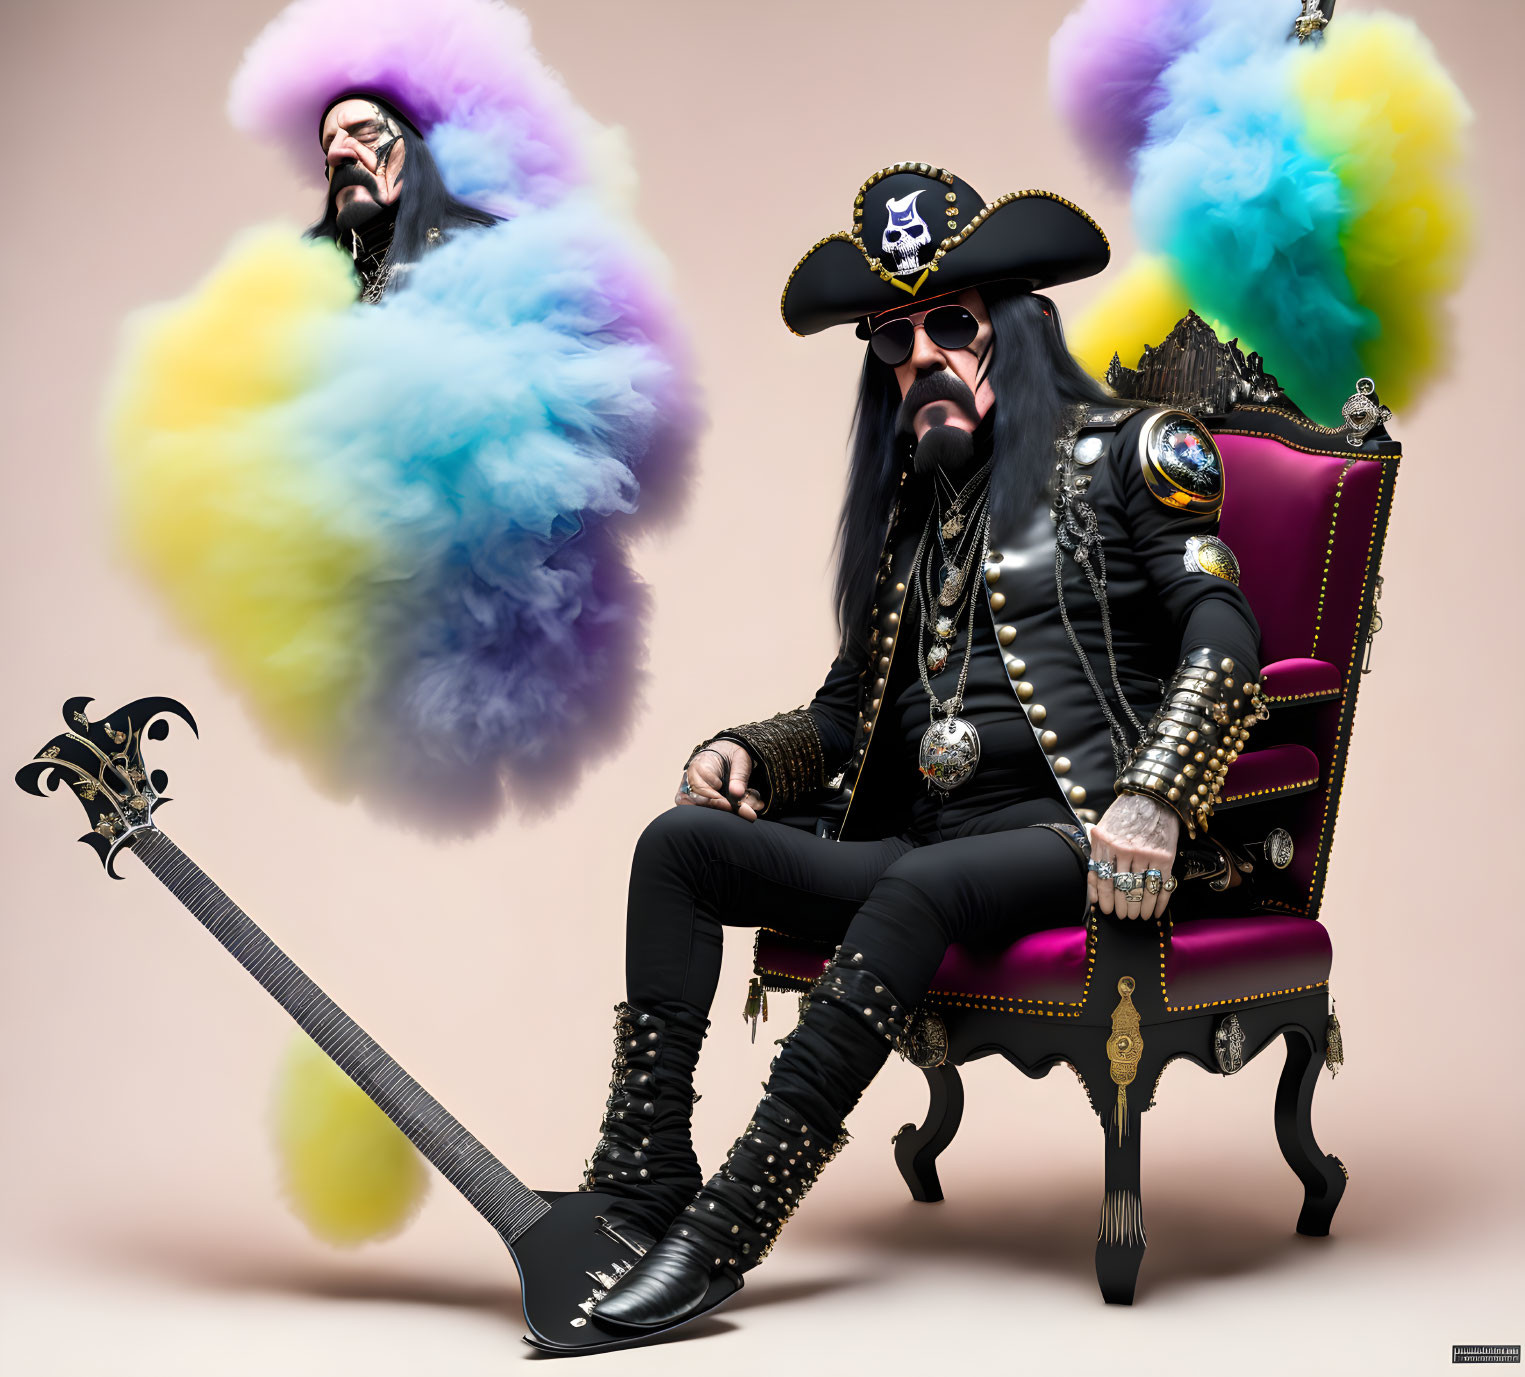 Stylized pirate figure on ornate chair with guitar and colorful smoke